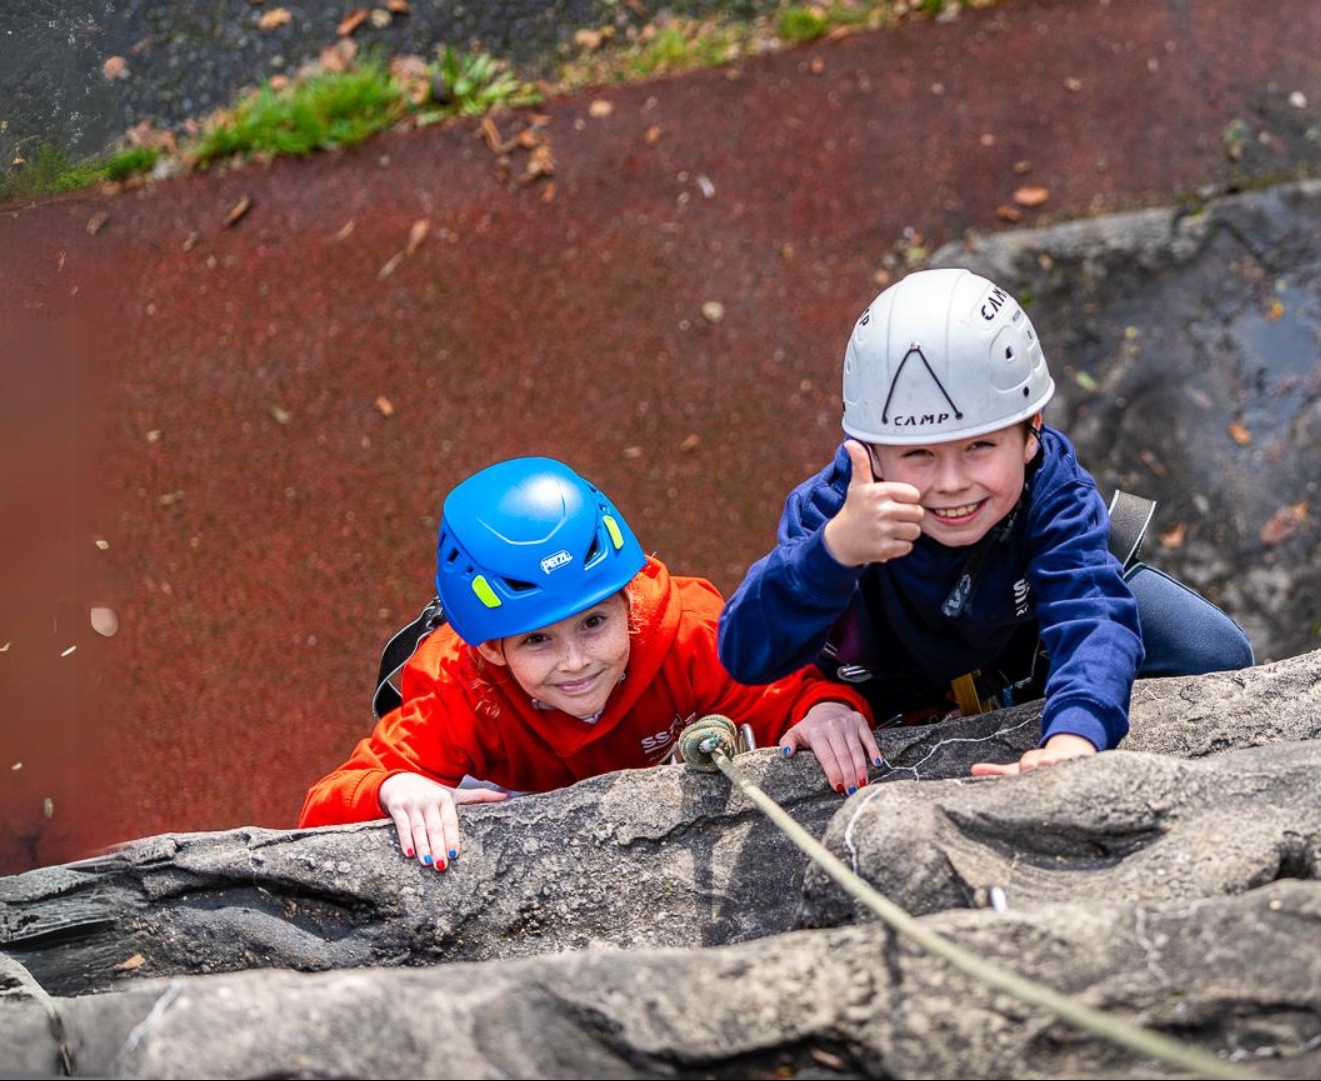 An aerial view of two boys climbing the outdoor climbing wall wearing helmets and smiling at the camera. The boy on the right is giving a thumbs up to the camera.